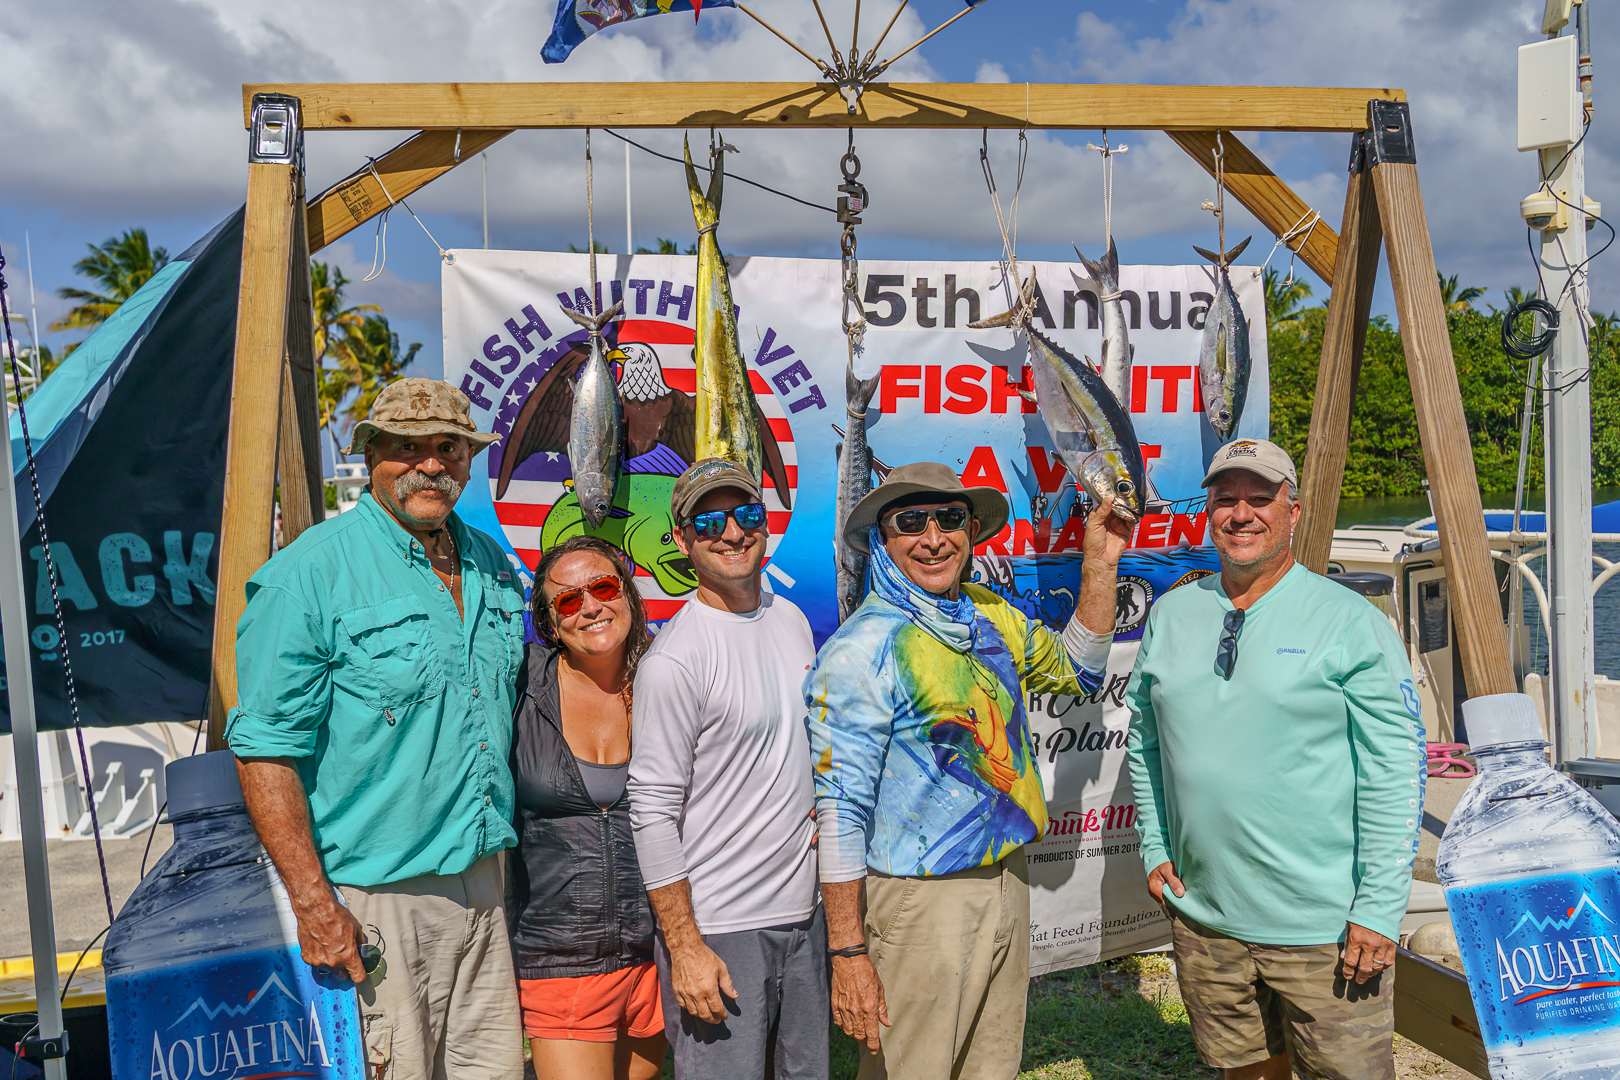 Winners of the Fish With A Vet Tournament included, first place, 17-pound barracuda, Graviel Santana on Golden Eagle, Capt. Edgar Bengoa; second place, 12.5-pound barracuda, Augustin Mason on Down South Charters, Capt. Randy Brewington; third place, 9.2-pound barracuda, Dale Mason on Down South Charters; smallest fish, 1.3-pound bar jack, Kevin Henley on Down South Charters. (Photo by Winners of the Fish With A Vet Tournament included, first place, 17-pound barracuda, Graviel Santana on Golden Eagle, Capt. Edgar Bengoa; second place, 12.5-pound barracuda, Augustin Mason on Down South Charters, Capt. Randy Brewington; third place, 9.2-pound barracuda, Dale Mason on Down South Charters; smallest fish, 1.3-pound bar jack, Kevin Henley on Down South Charters. (Photo by Chéri@freespirit) 